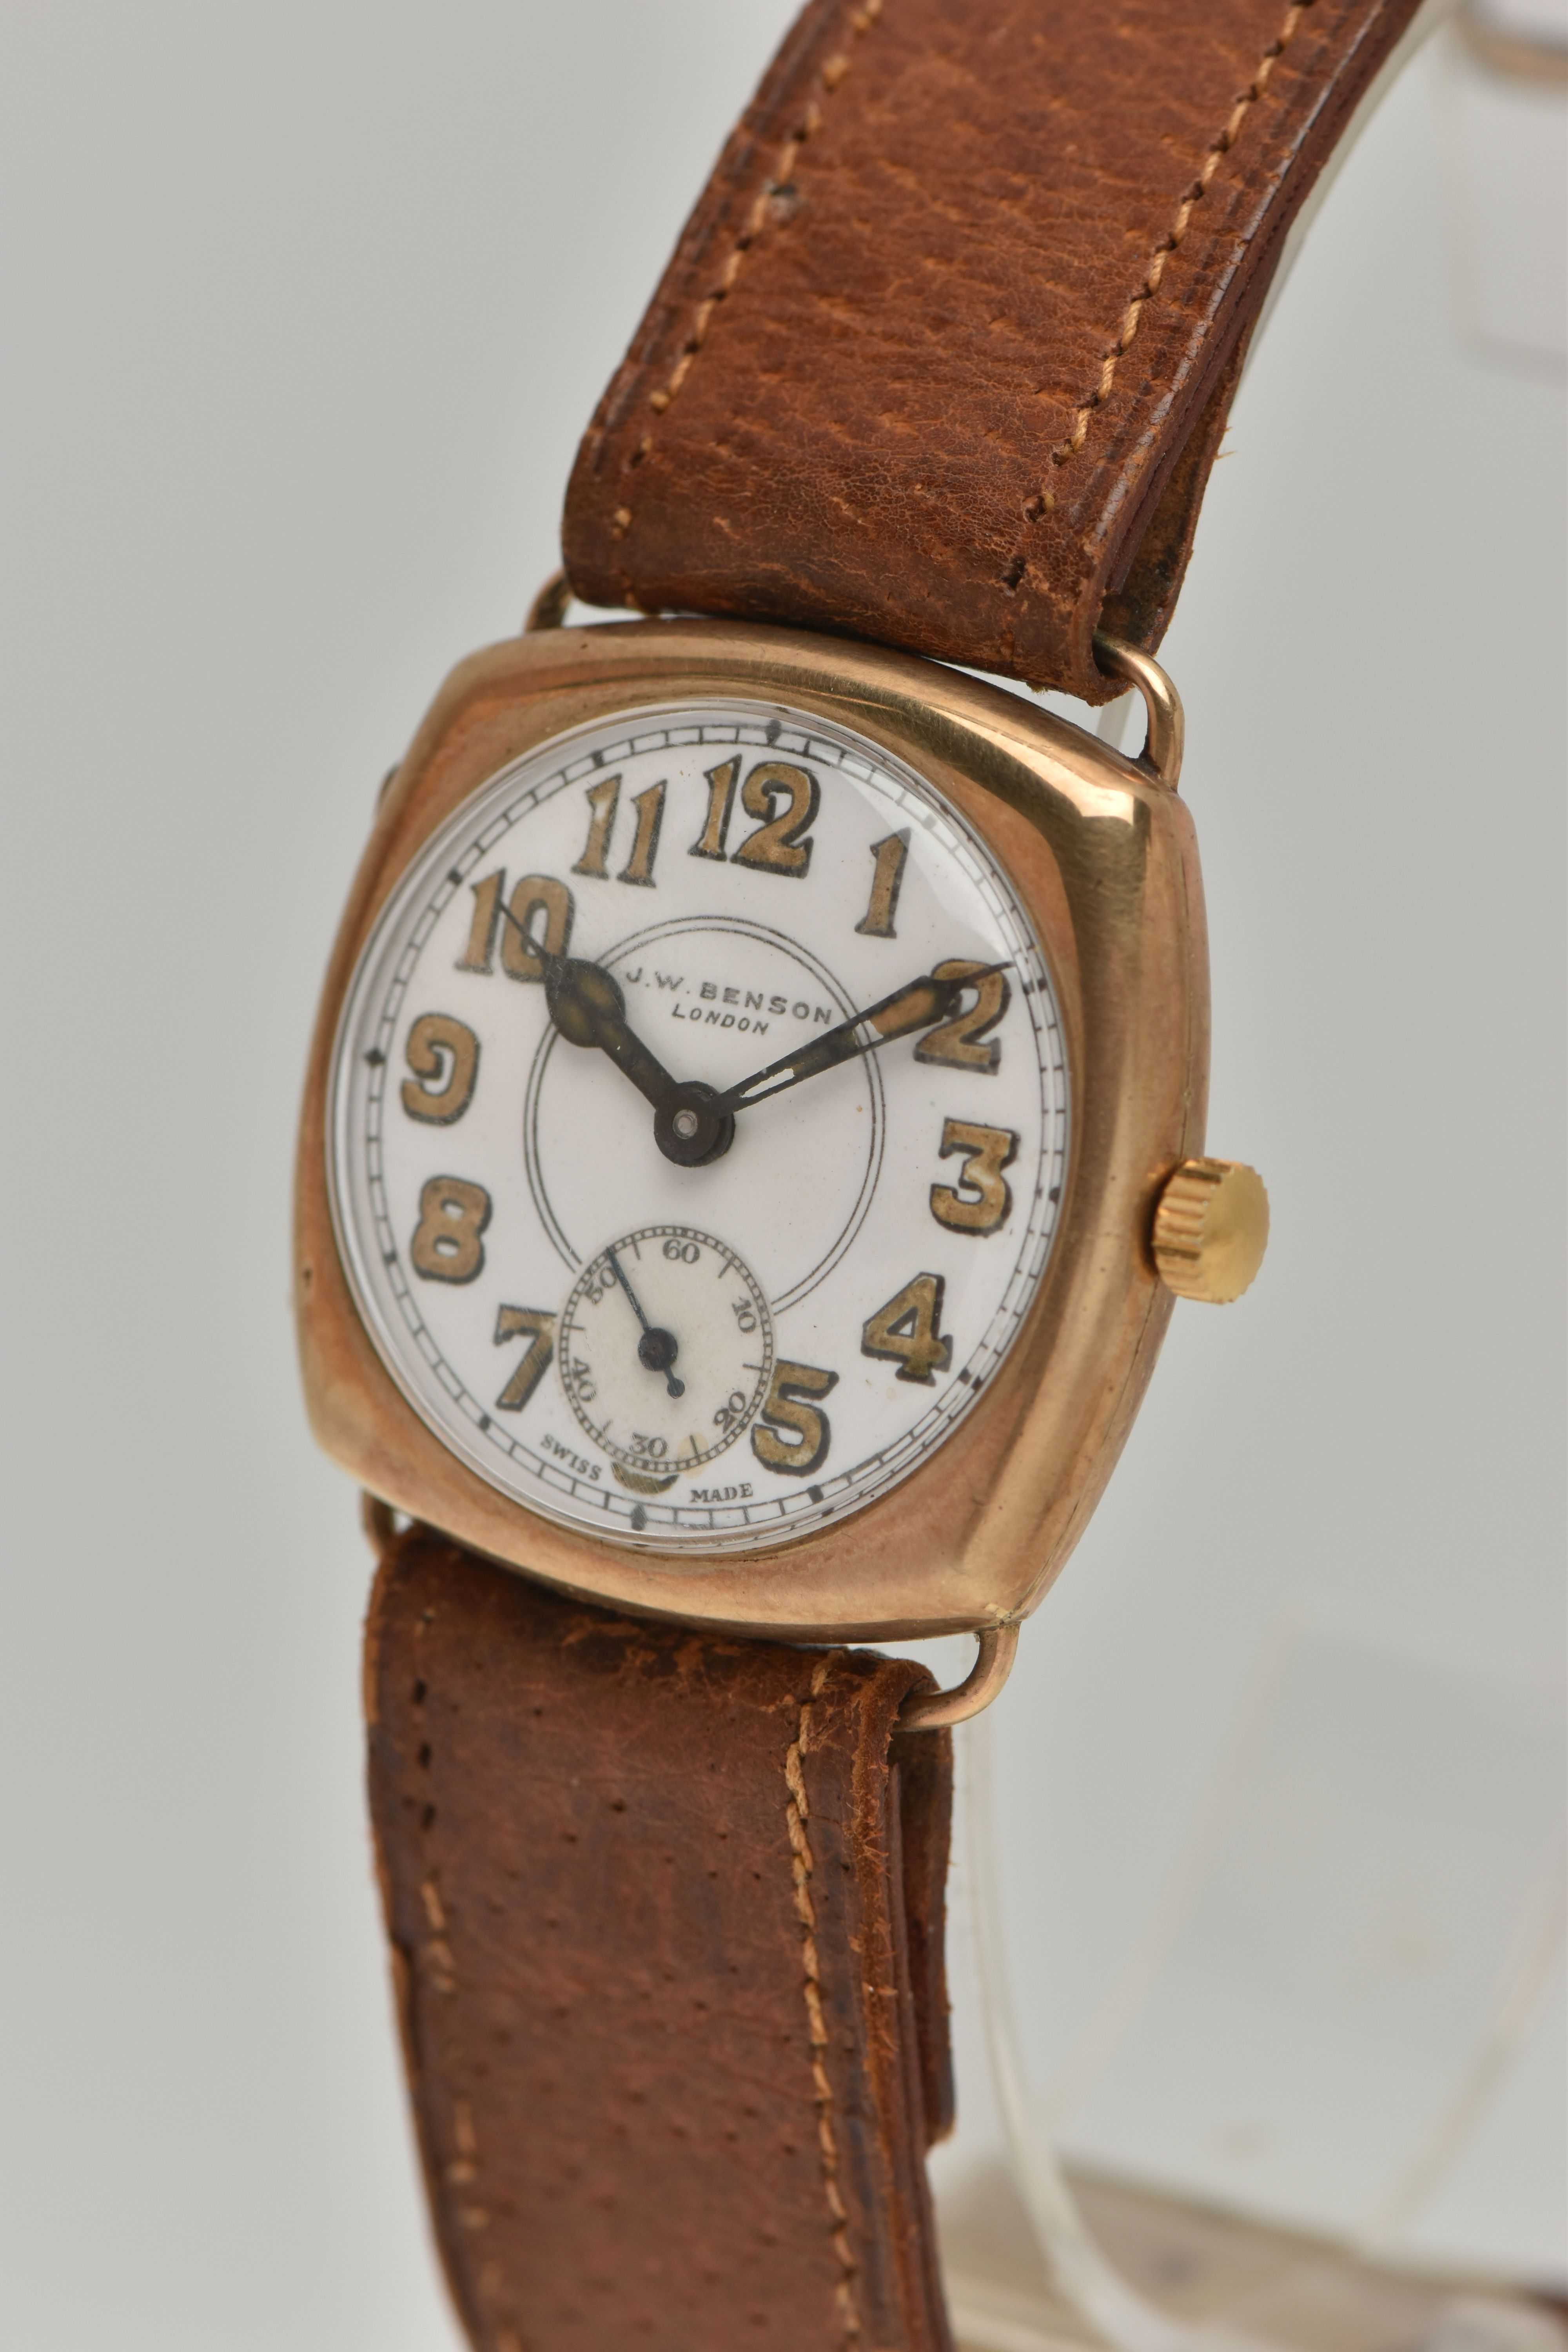 A 9CT GOLD 'J W BENSON' WRISTWATCH, hand wound movement, round dial signed 'J W Benson London', - Image 3 of 6